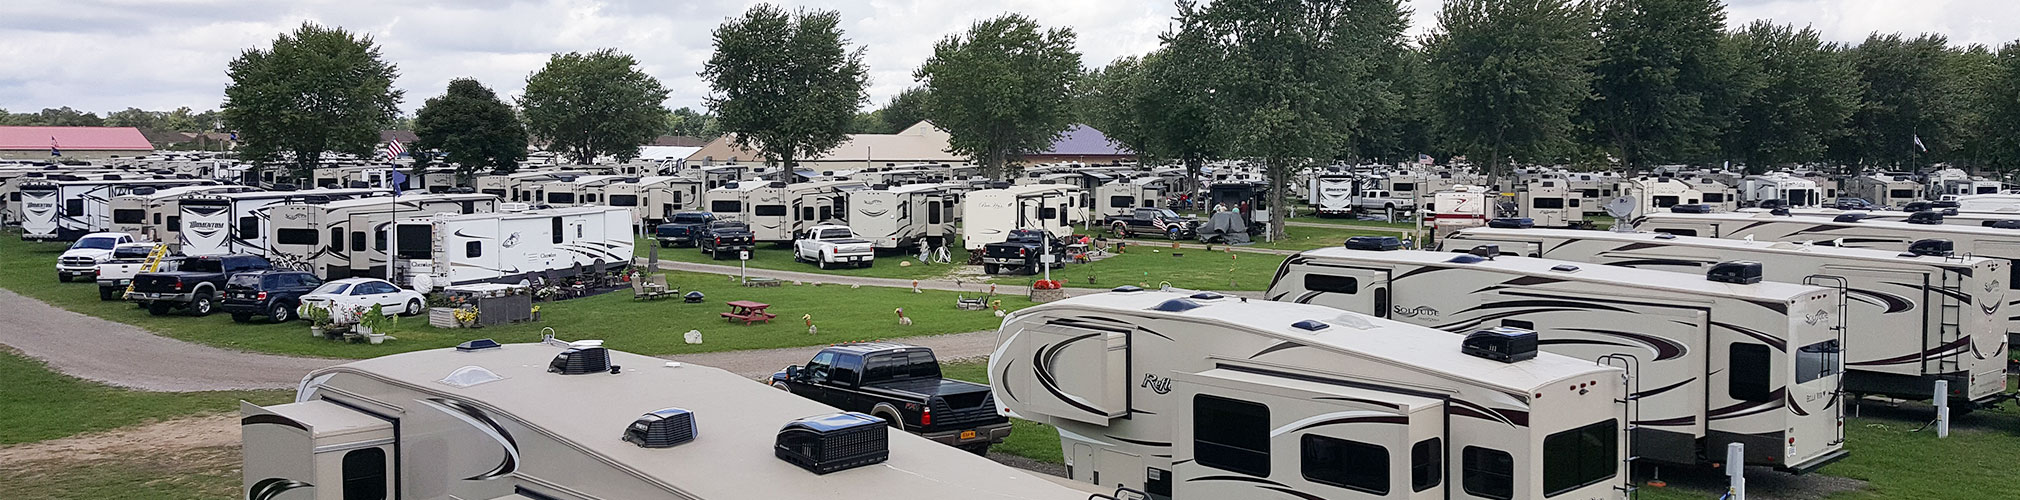 Camping in Elkhart, IN Elkhart Campground